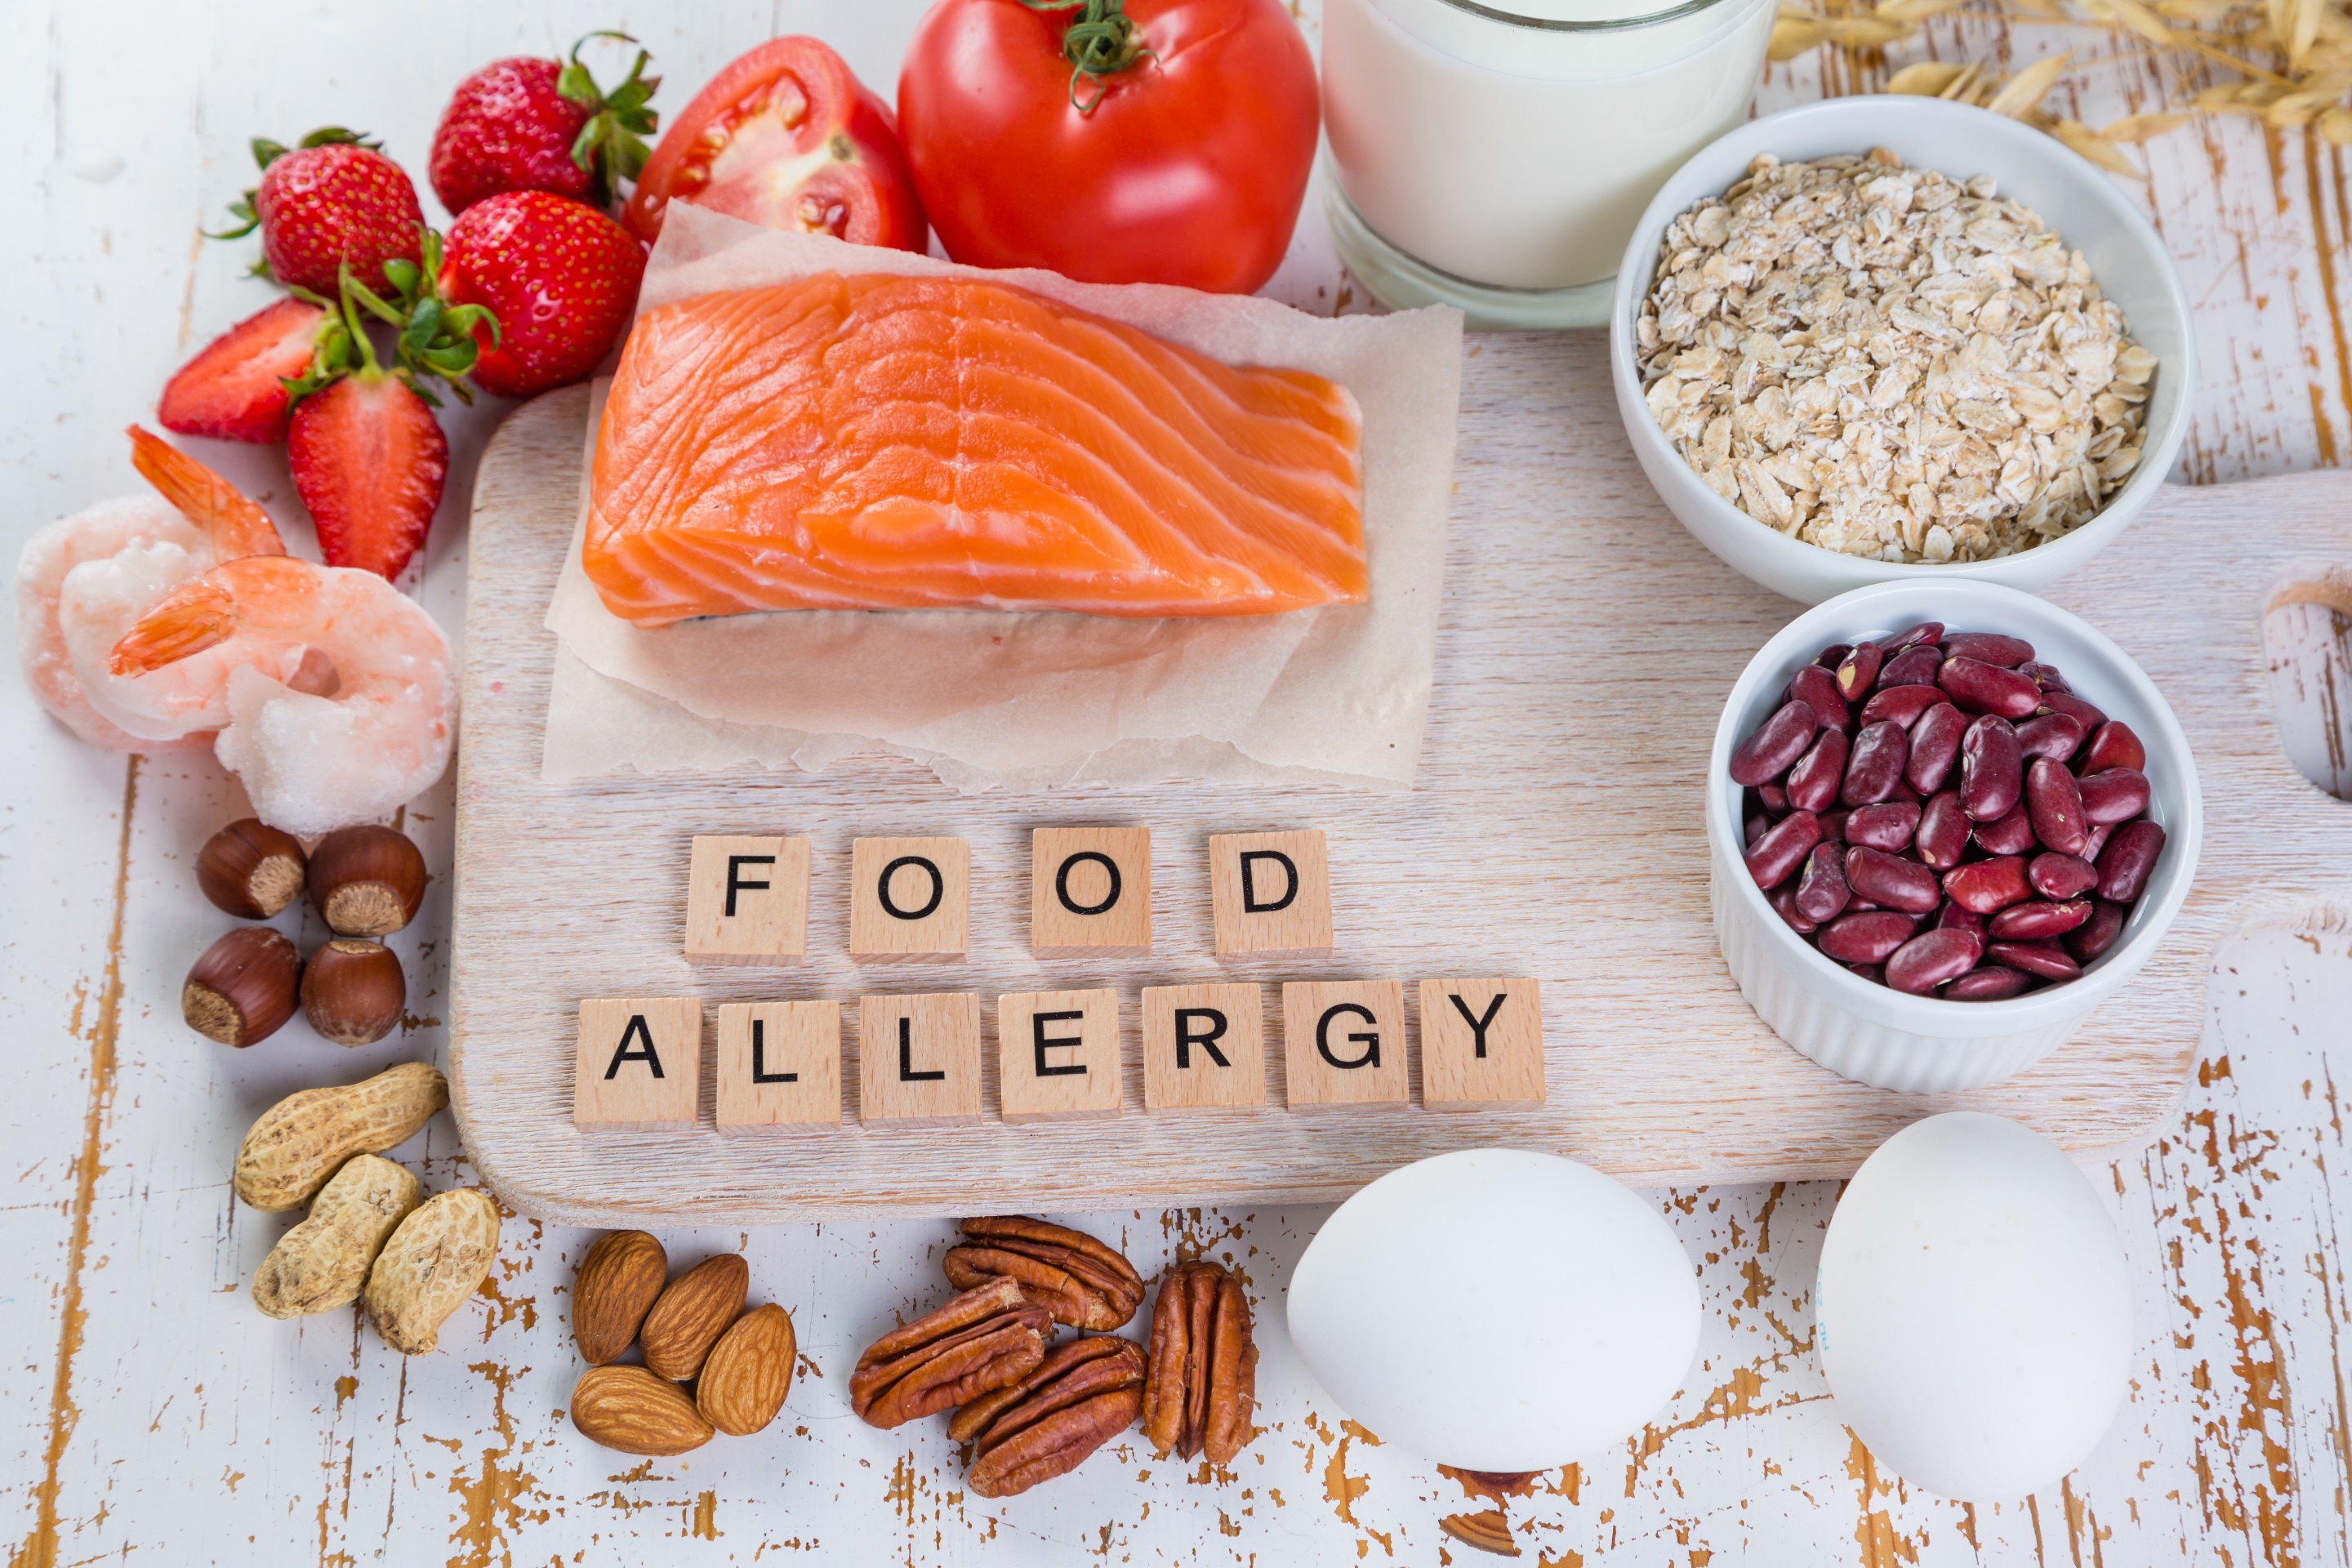 Picture of common food allergens